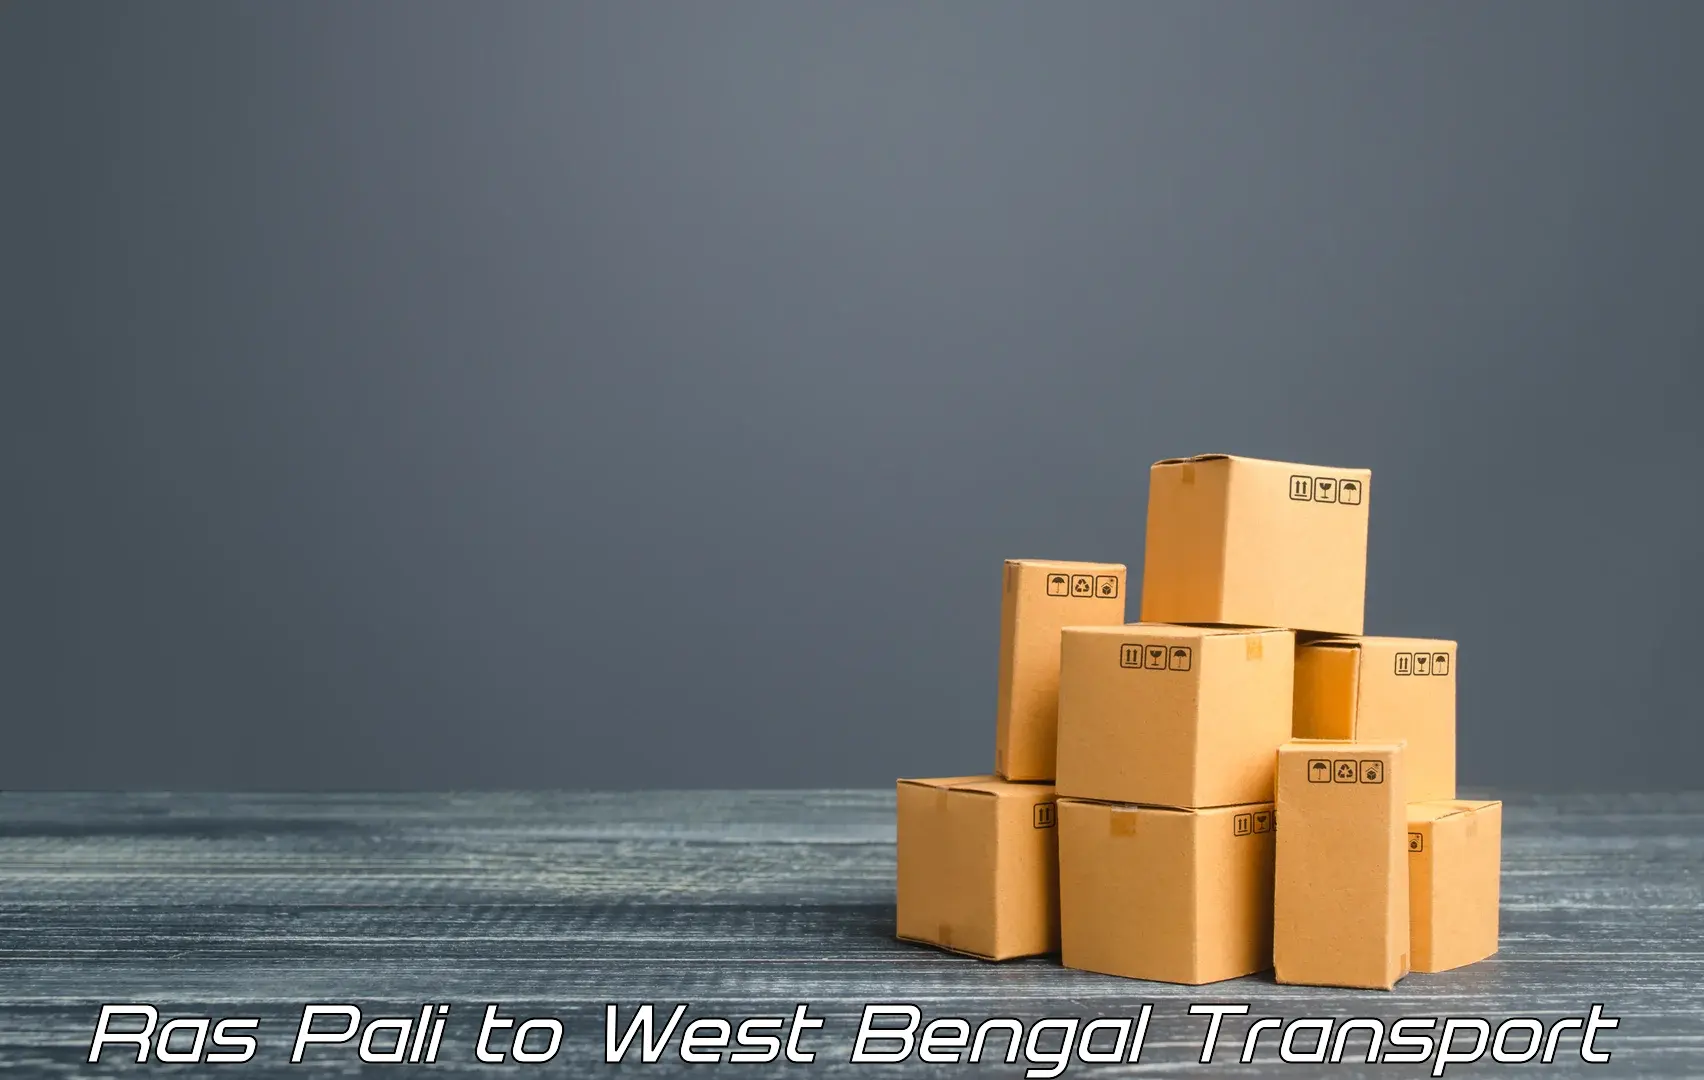 Daily transport service Ras Pali to West Bengal